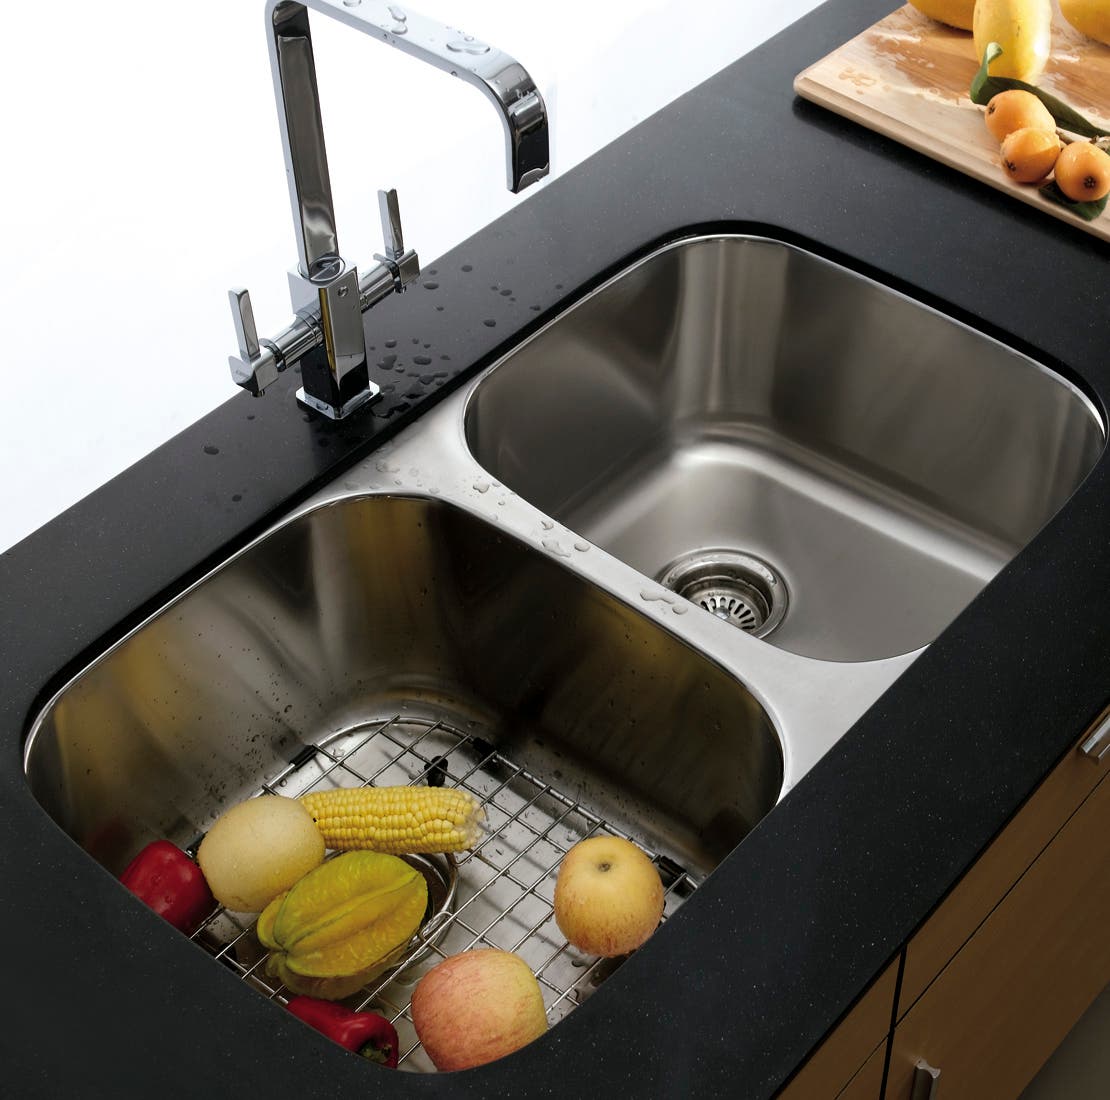 How to Properly Clean a Stainless Steel Sink or Faucet